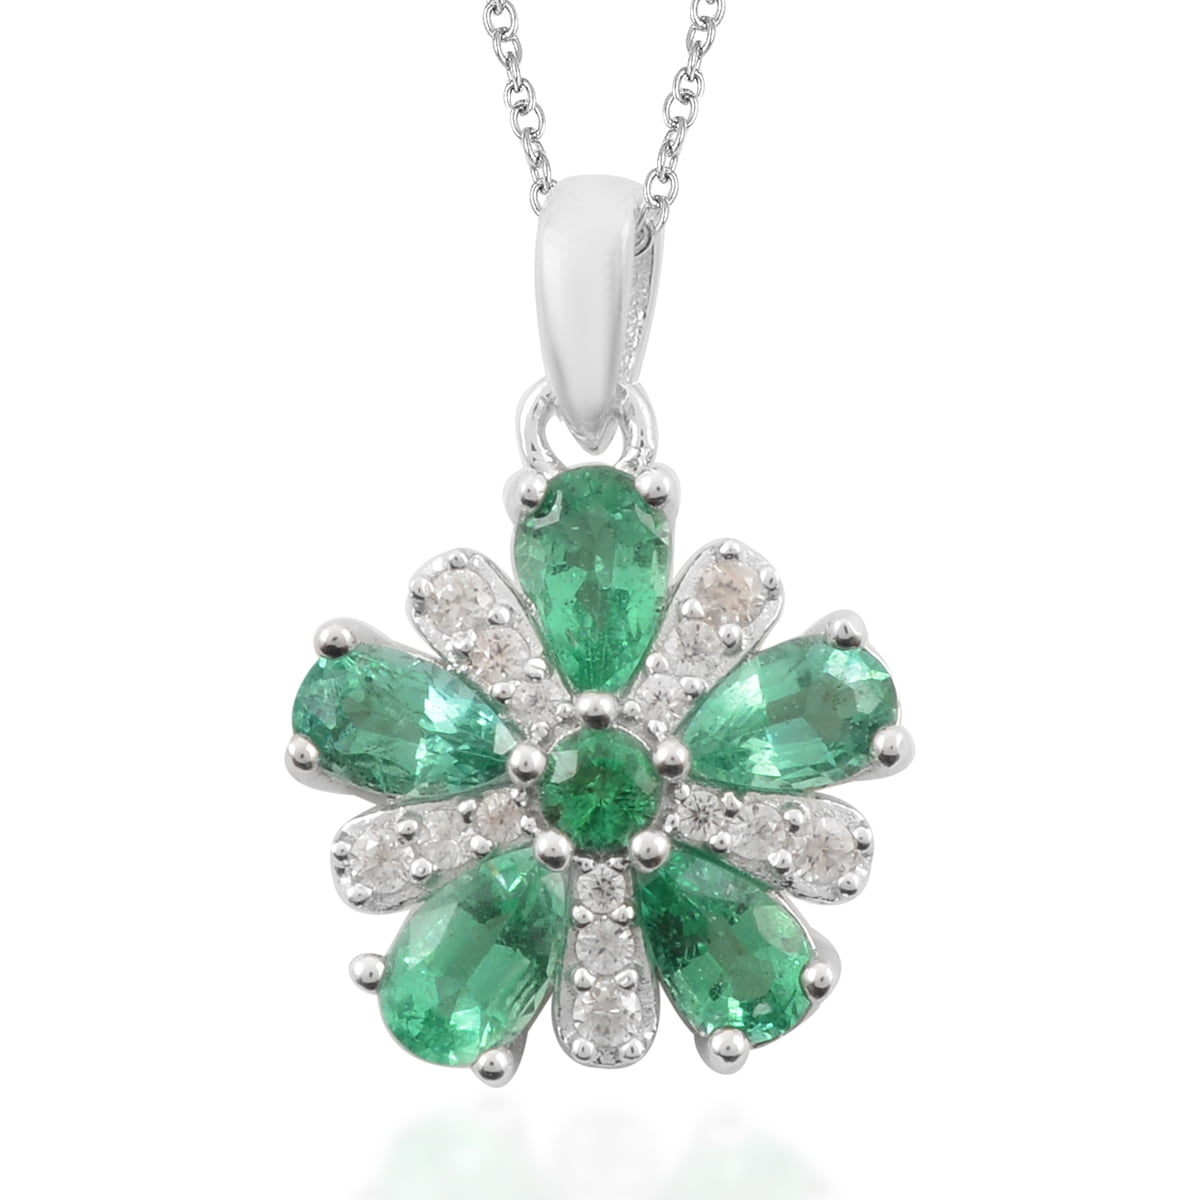 Emerald & polki diamond pendant necklace chain 925 sterling silver gold plated Necklace Emerald Gemstone Diamond necklace gift for her